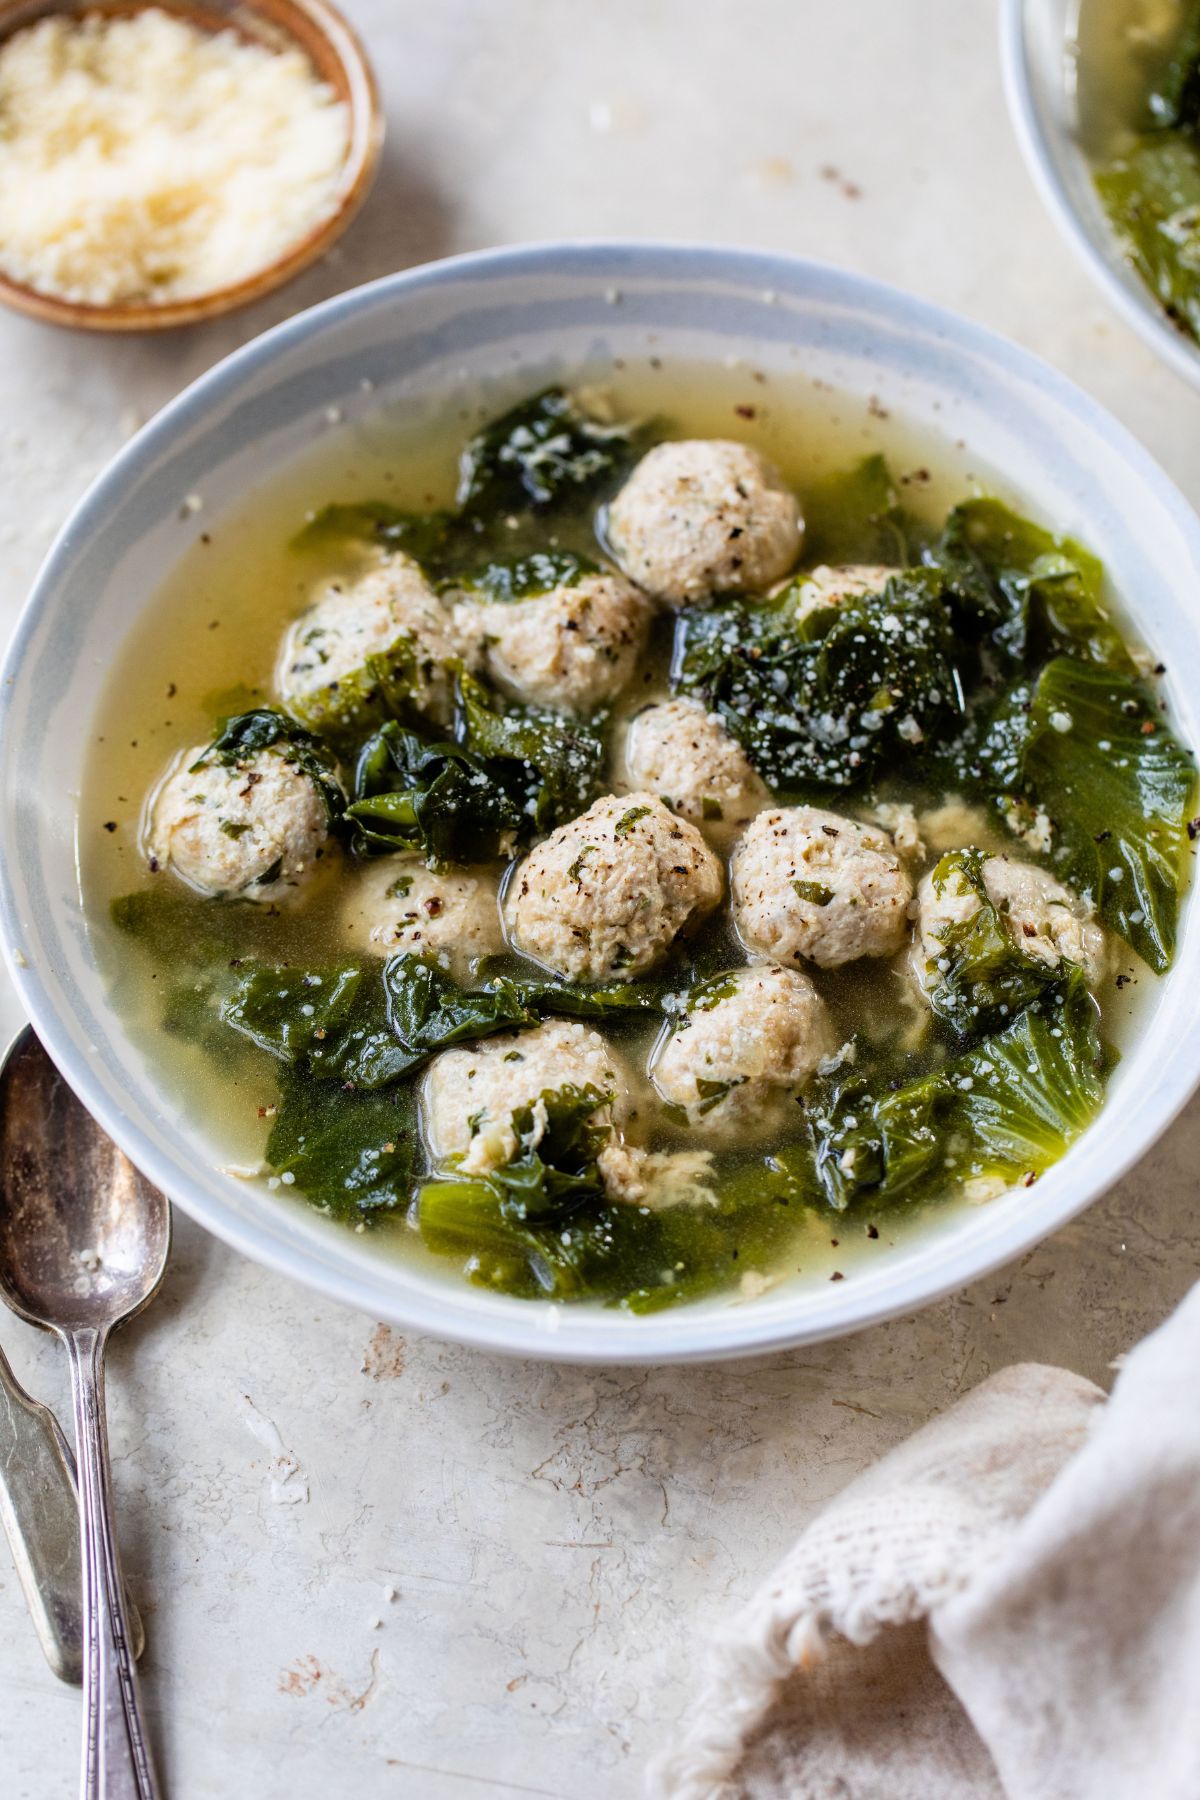 Italian wedding soup in a white bowl served with Parmesan cheese.